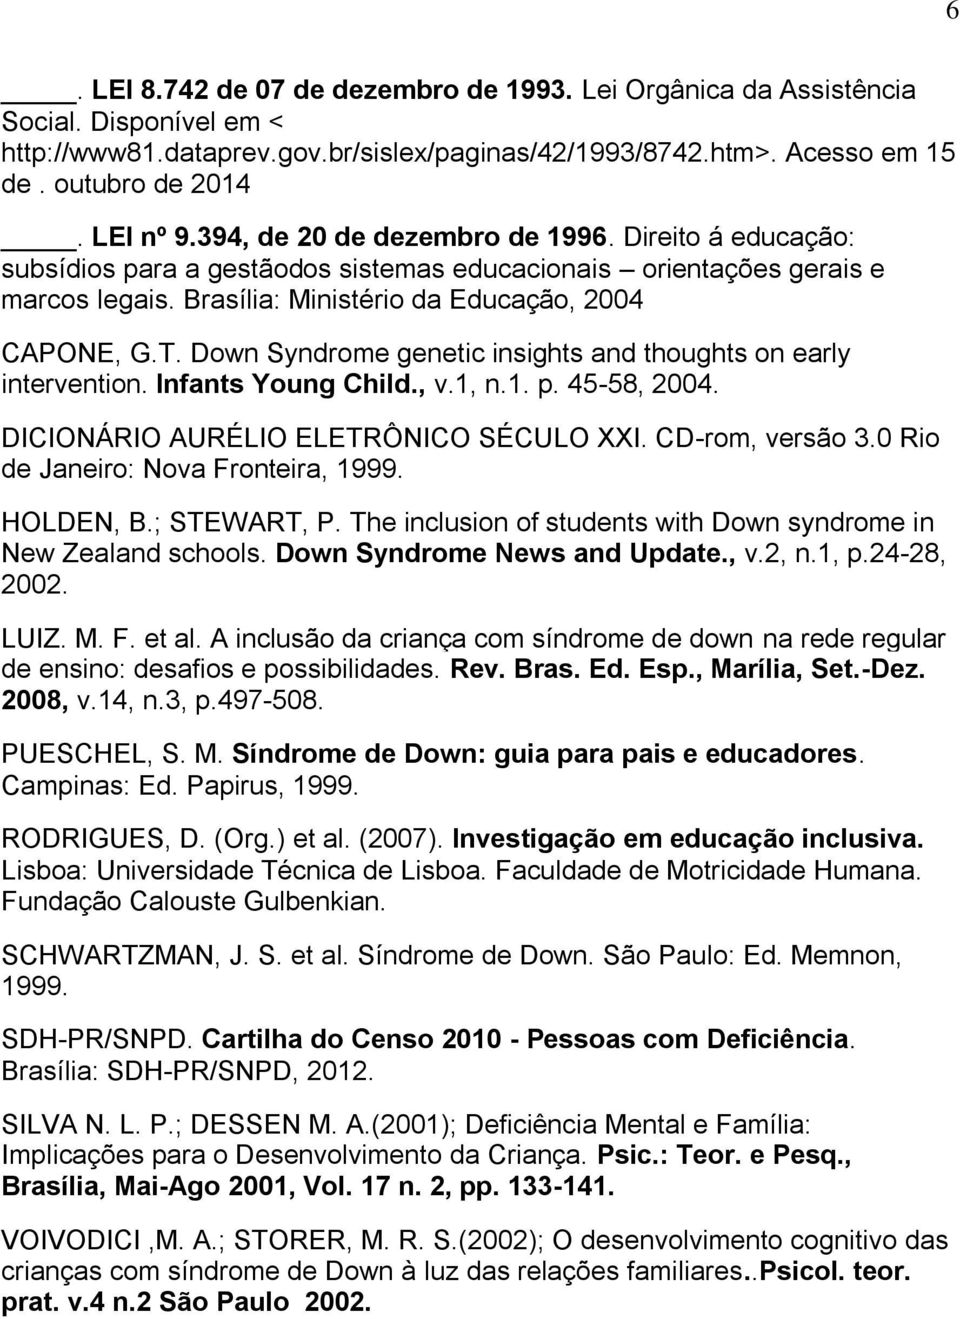 Down Syndrome genetic insights and thoughts on early intervention. Infants Young Child., v.1, n.1. p. 45-58, 2004. DICIONÁRIO AURÉLIO ELETRÔNICO SÉCULO XXI. CD-rom, versão 3.